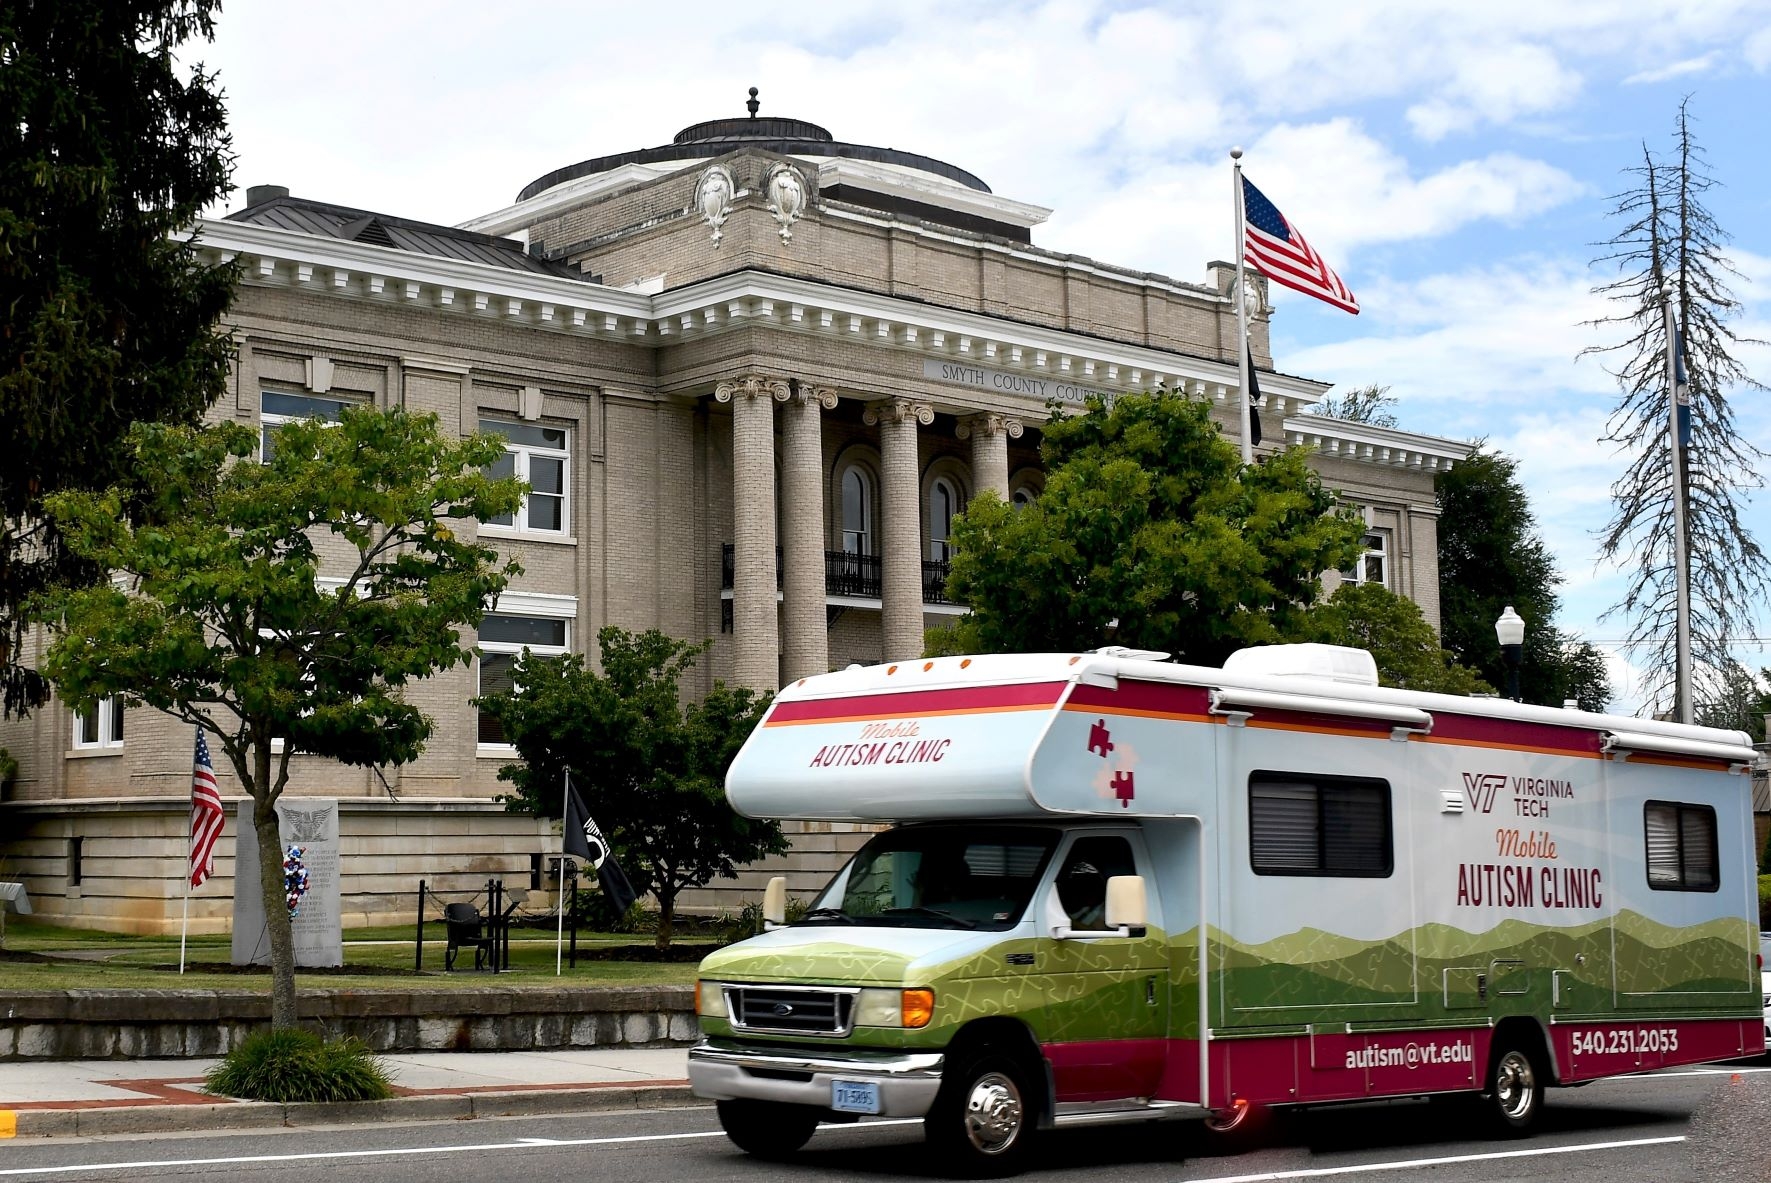 The Mobile Autism Clinic RV driving in front of the courthouse in downtown Marion, Virginia.